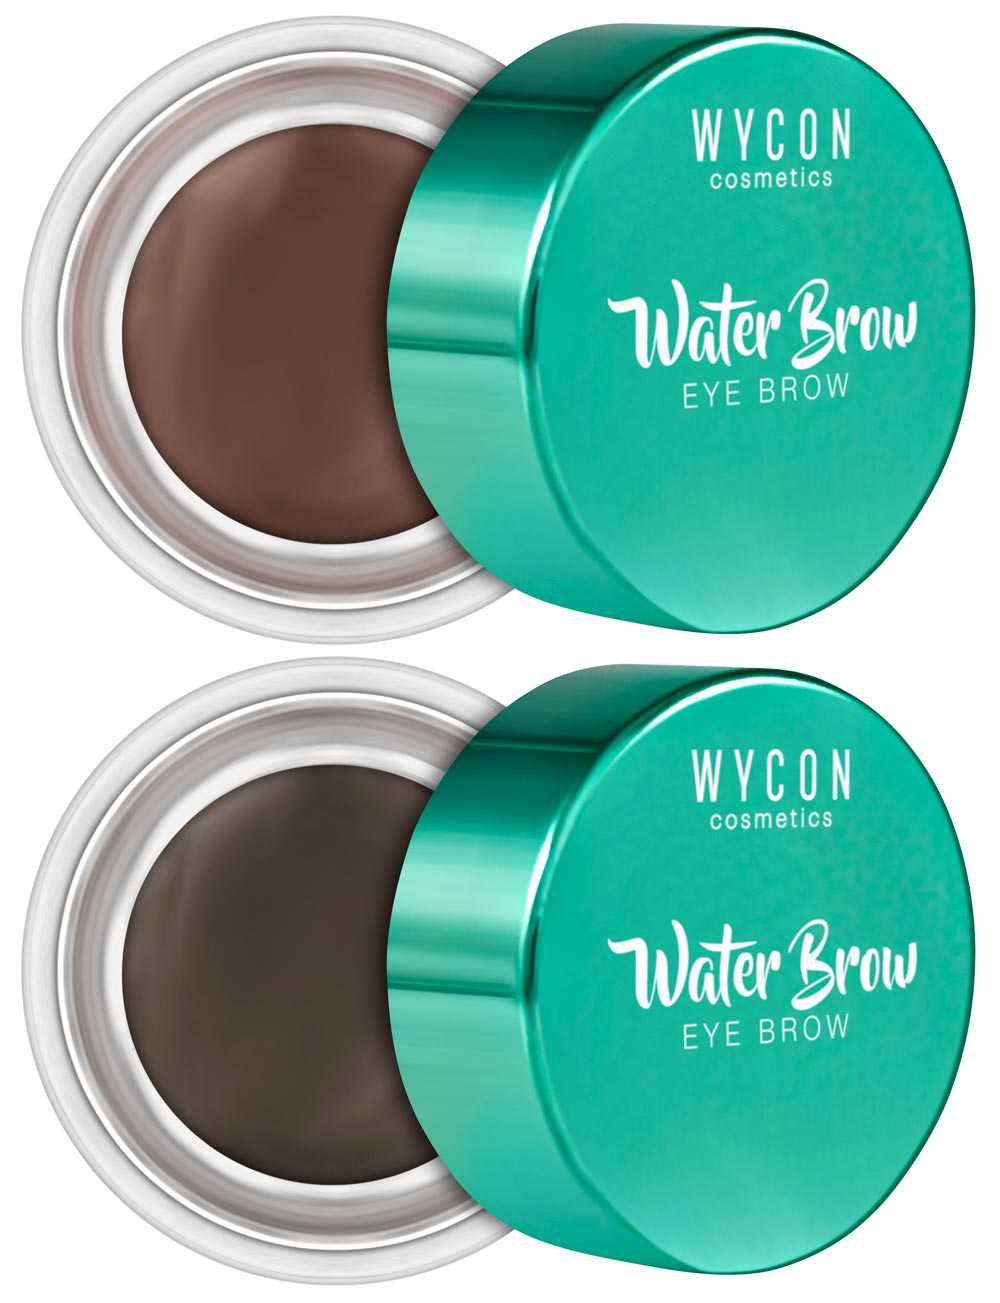 wycon water brow